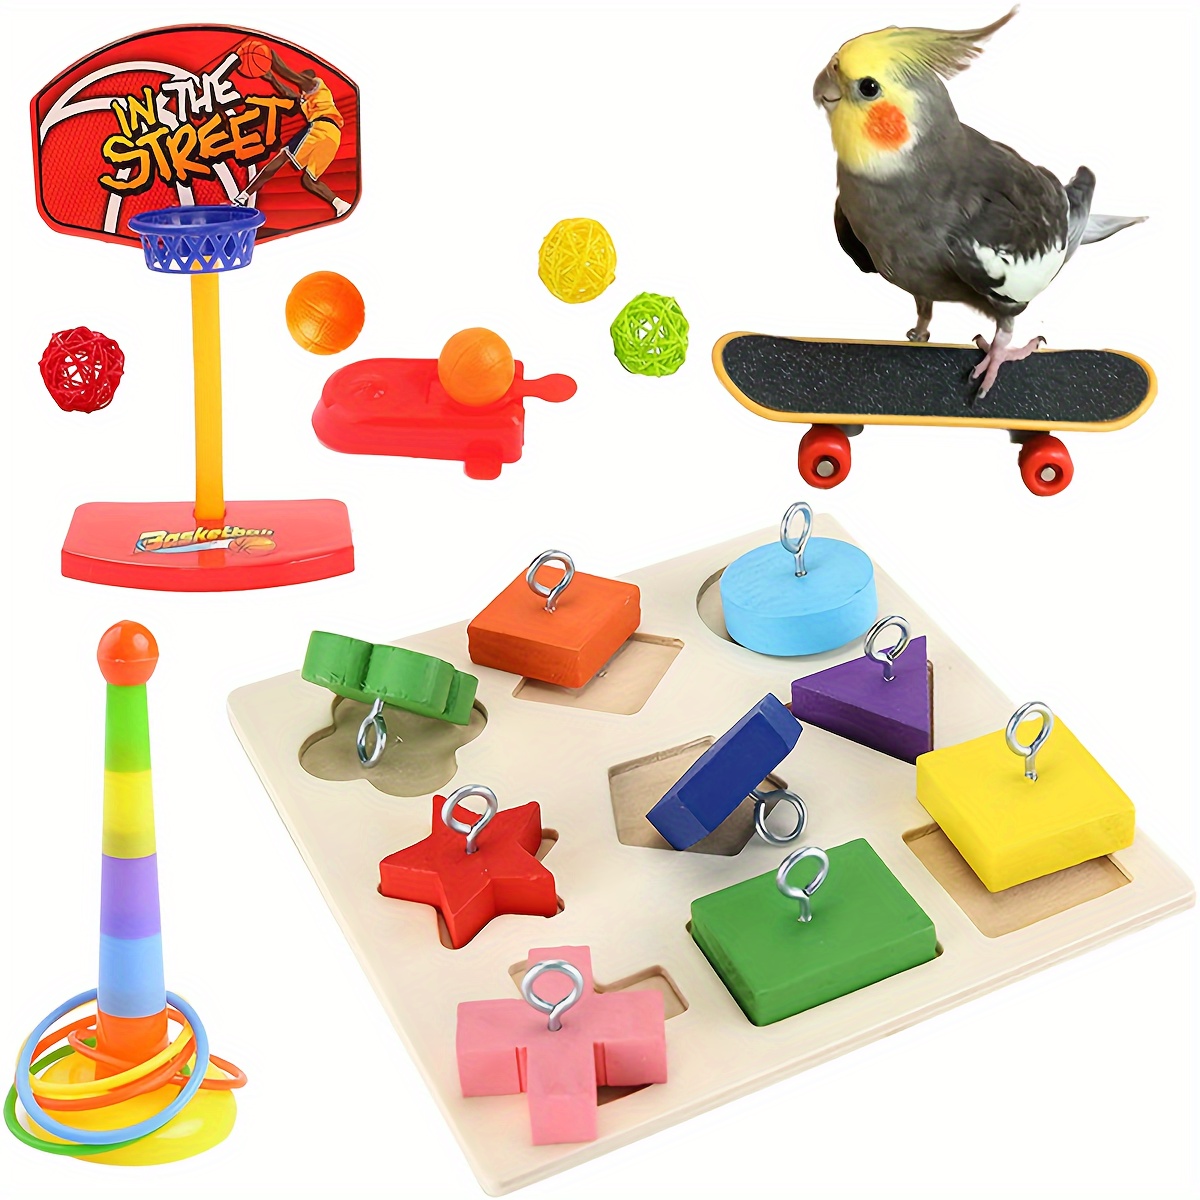 

Bird Toy Set, Parrot Wooden Block Puzzles Toy, Parrot Training Toy, Basketball Tossing Toy For Budgie Parakeet Cockatiel Conure Lovebird